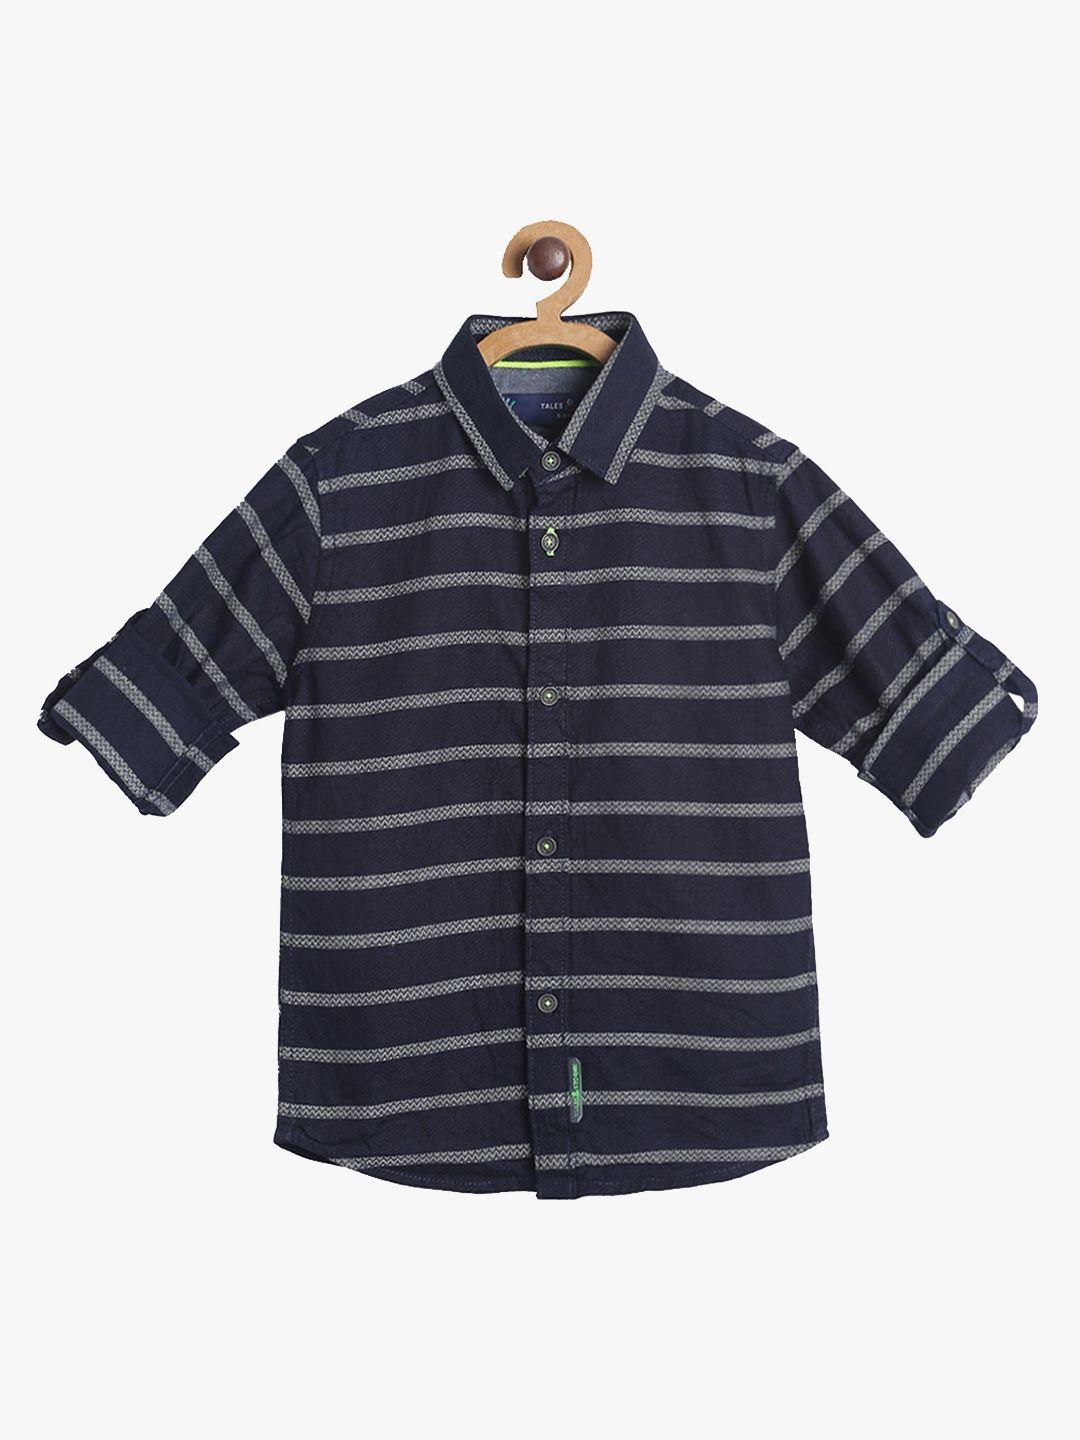 tales & stories boys navy blue regular fit striped casual shirt